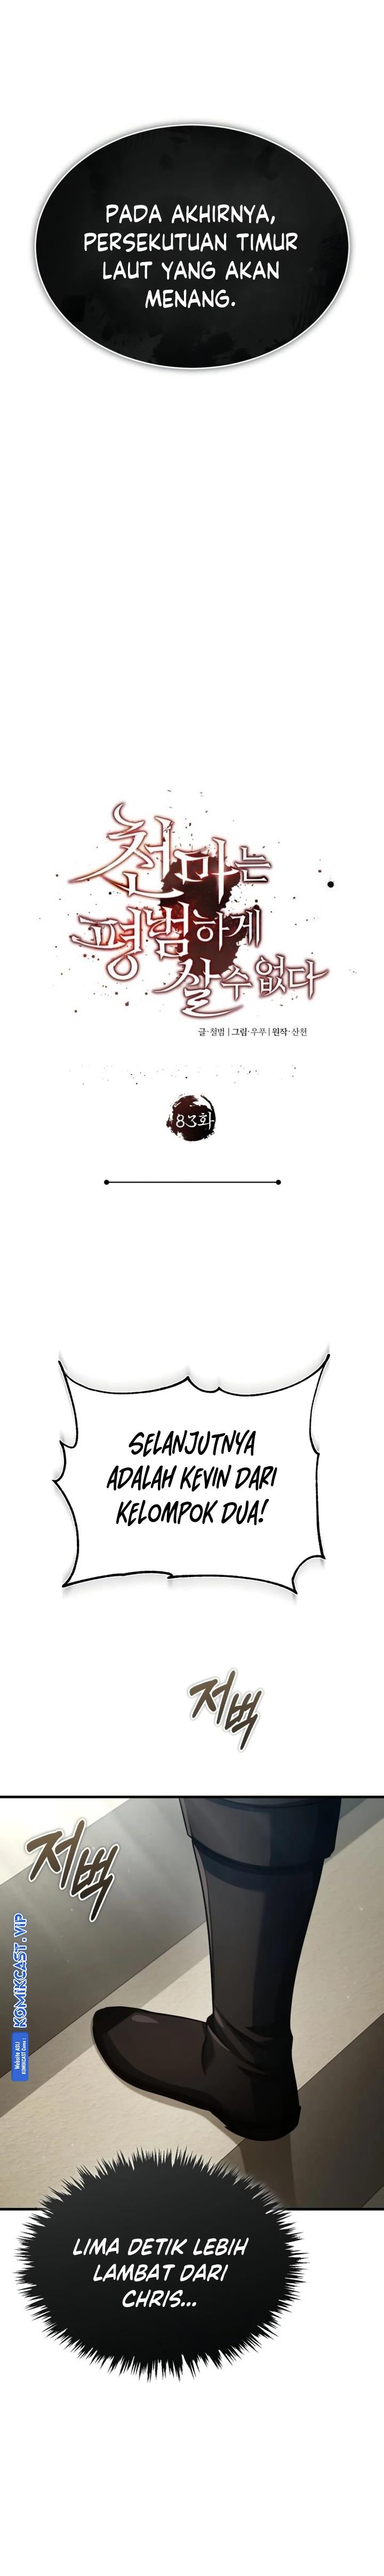 The Heavenly Demon Can’t Live a Normal Life Chapter 83